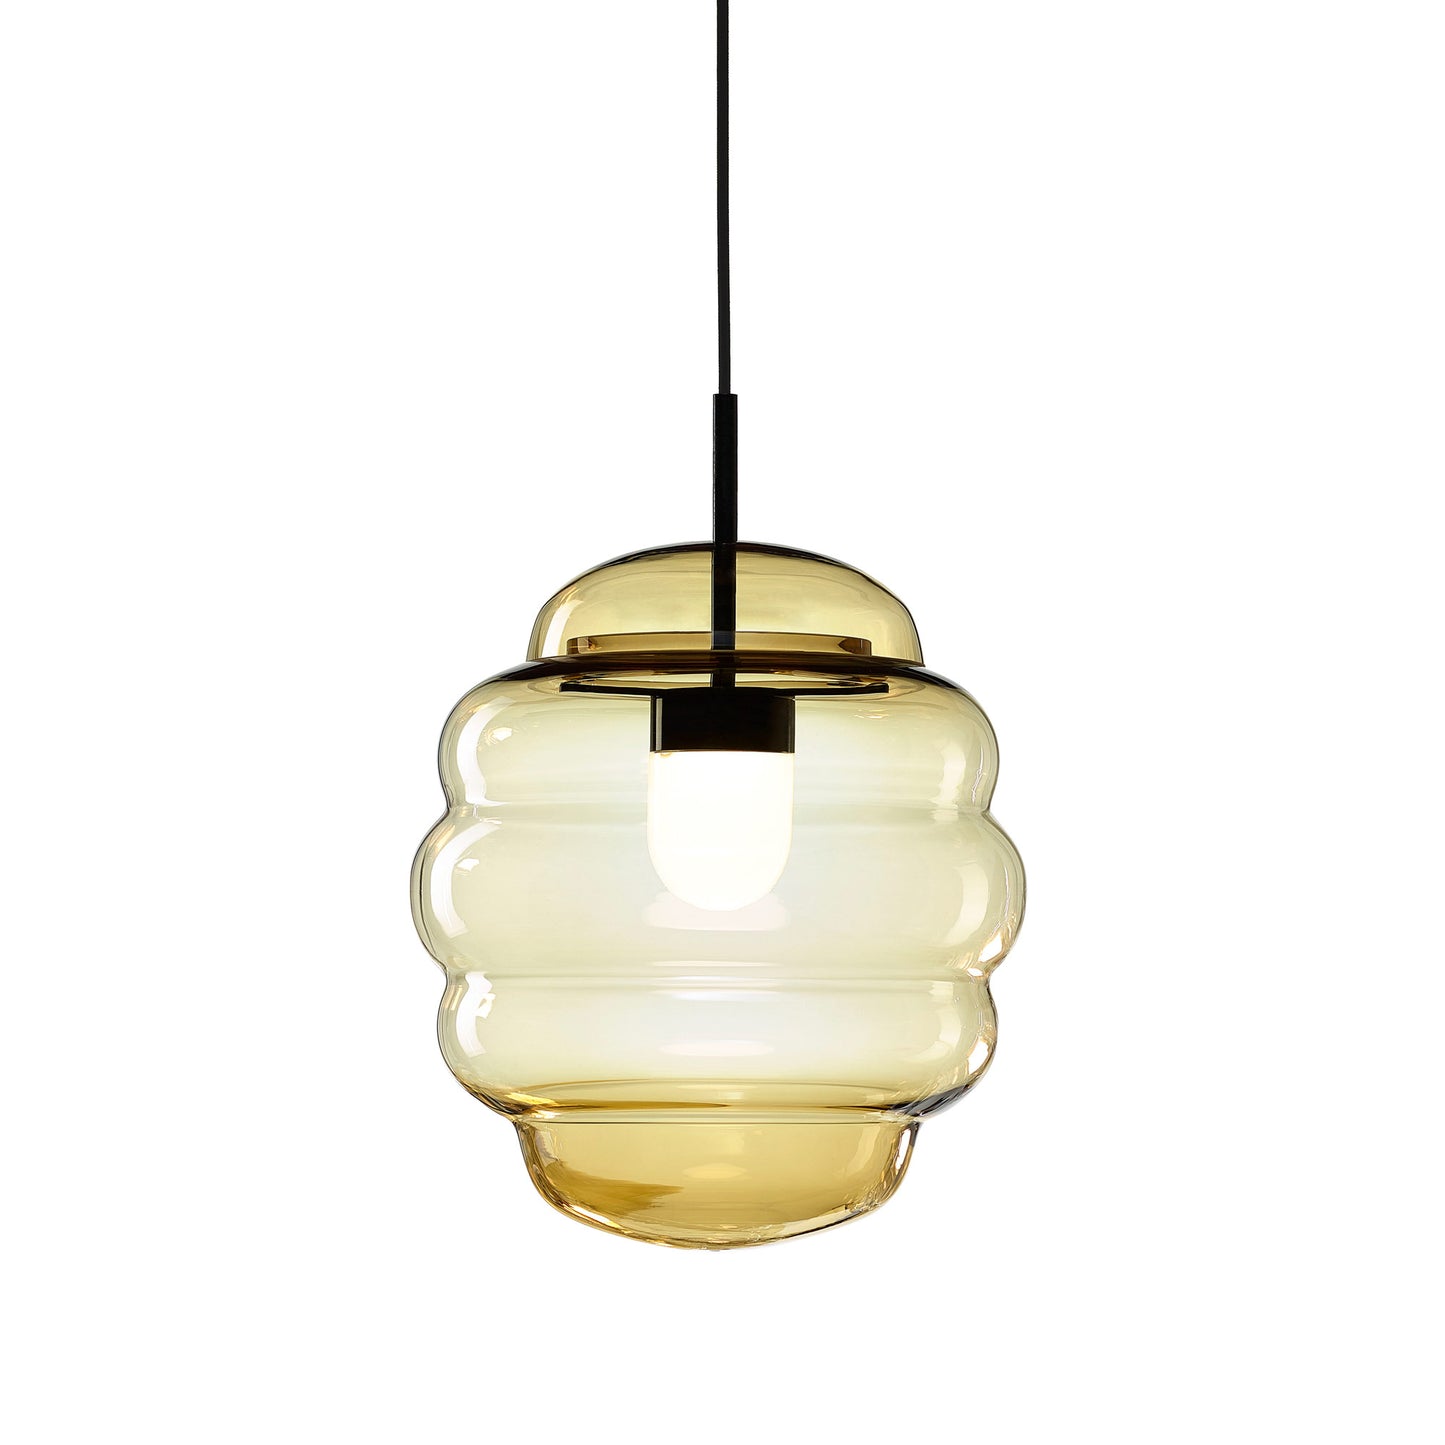 BOMMA - BLIMP PENDANT SMALL - from $2,578.50